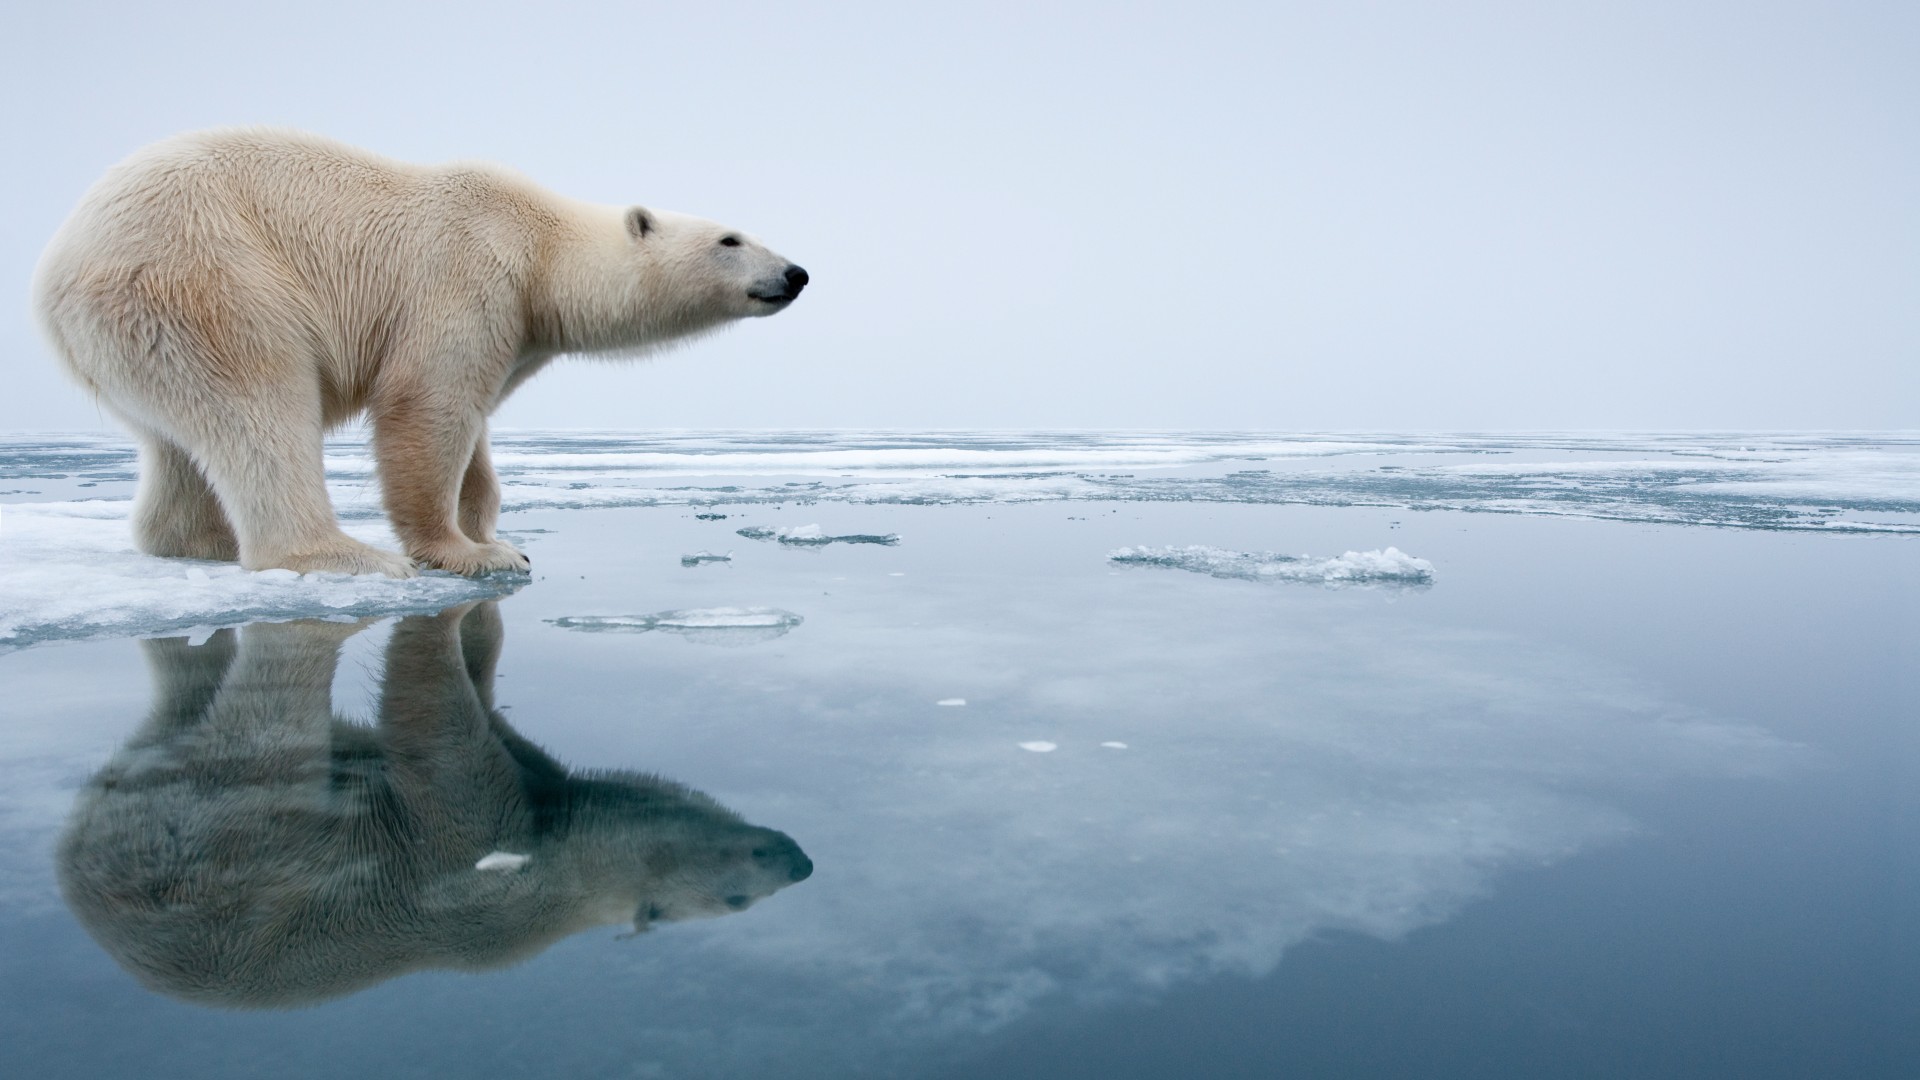 Why aren't there polar bears in Antarctica? | Live Science